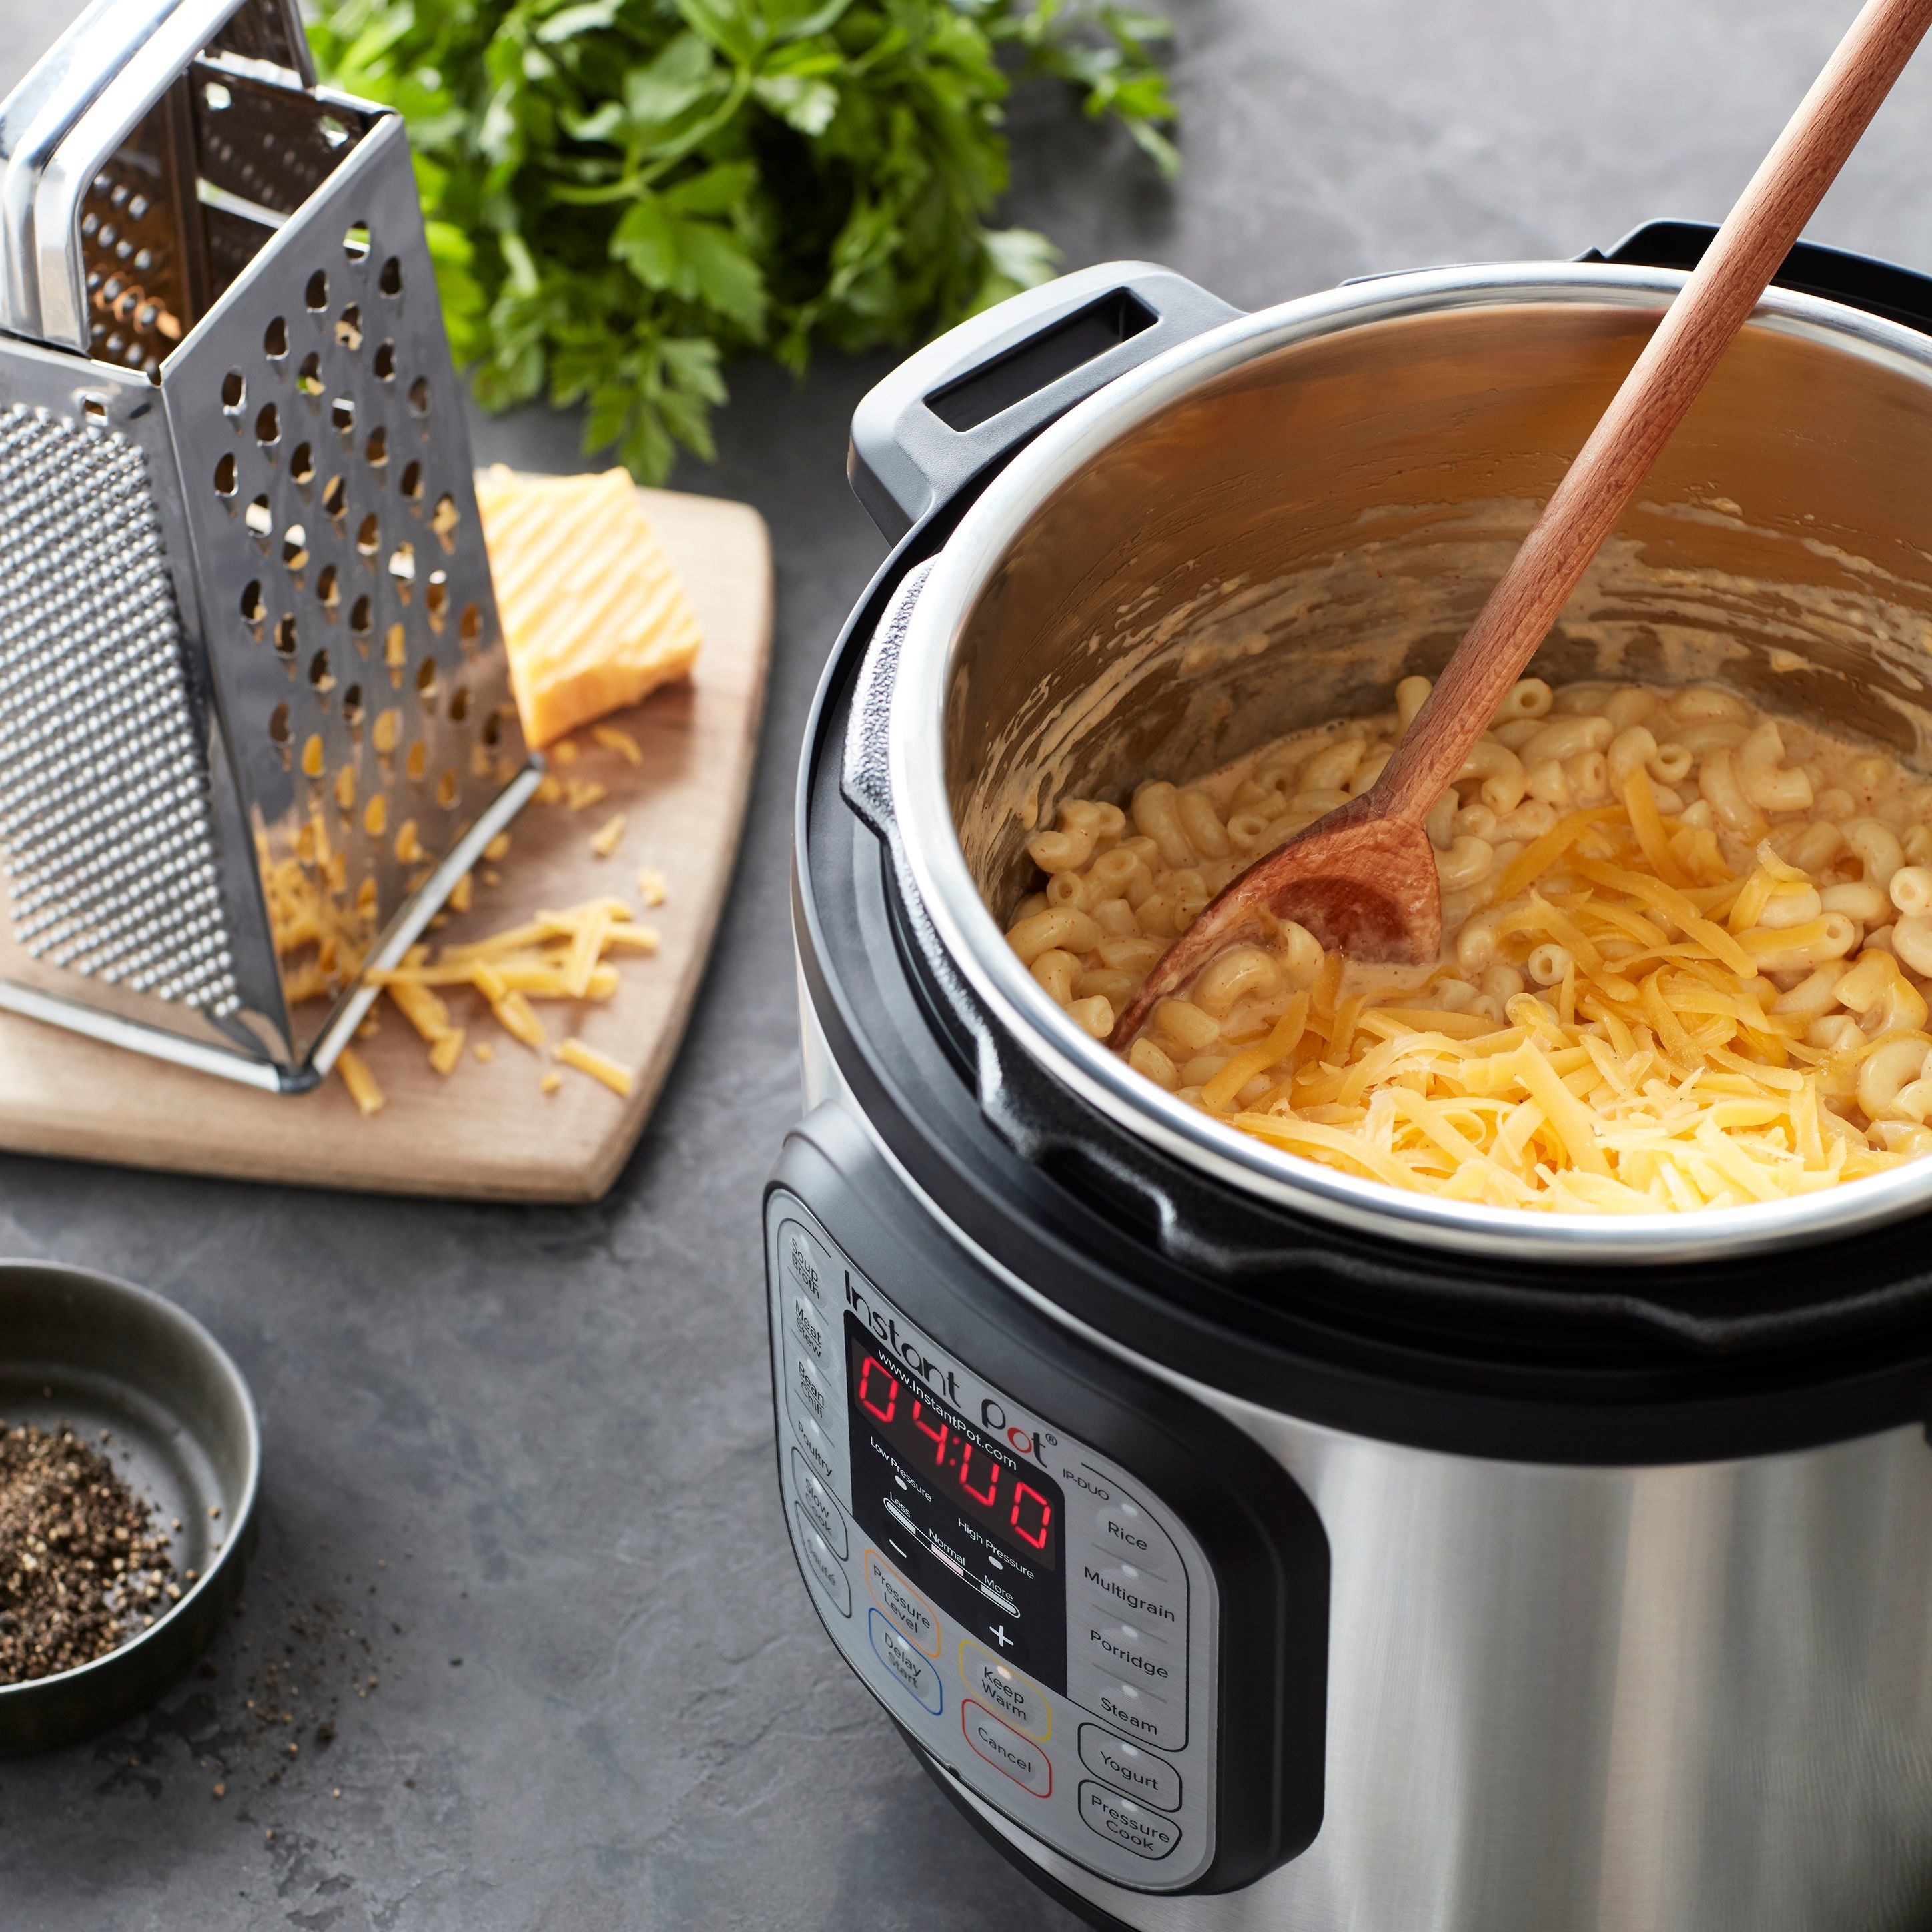 The Instant Pot full of macaroni and cheese